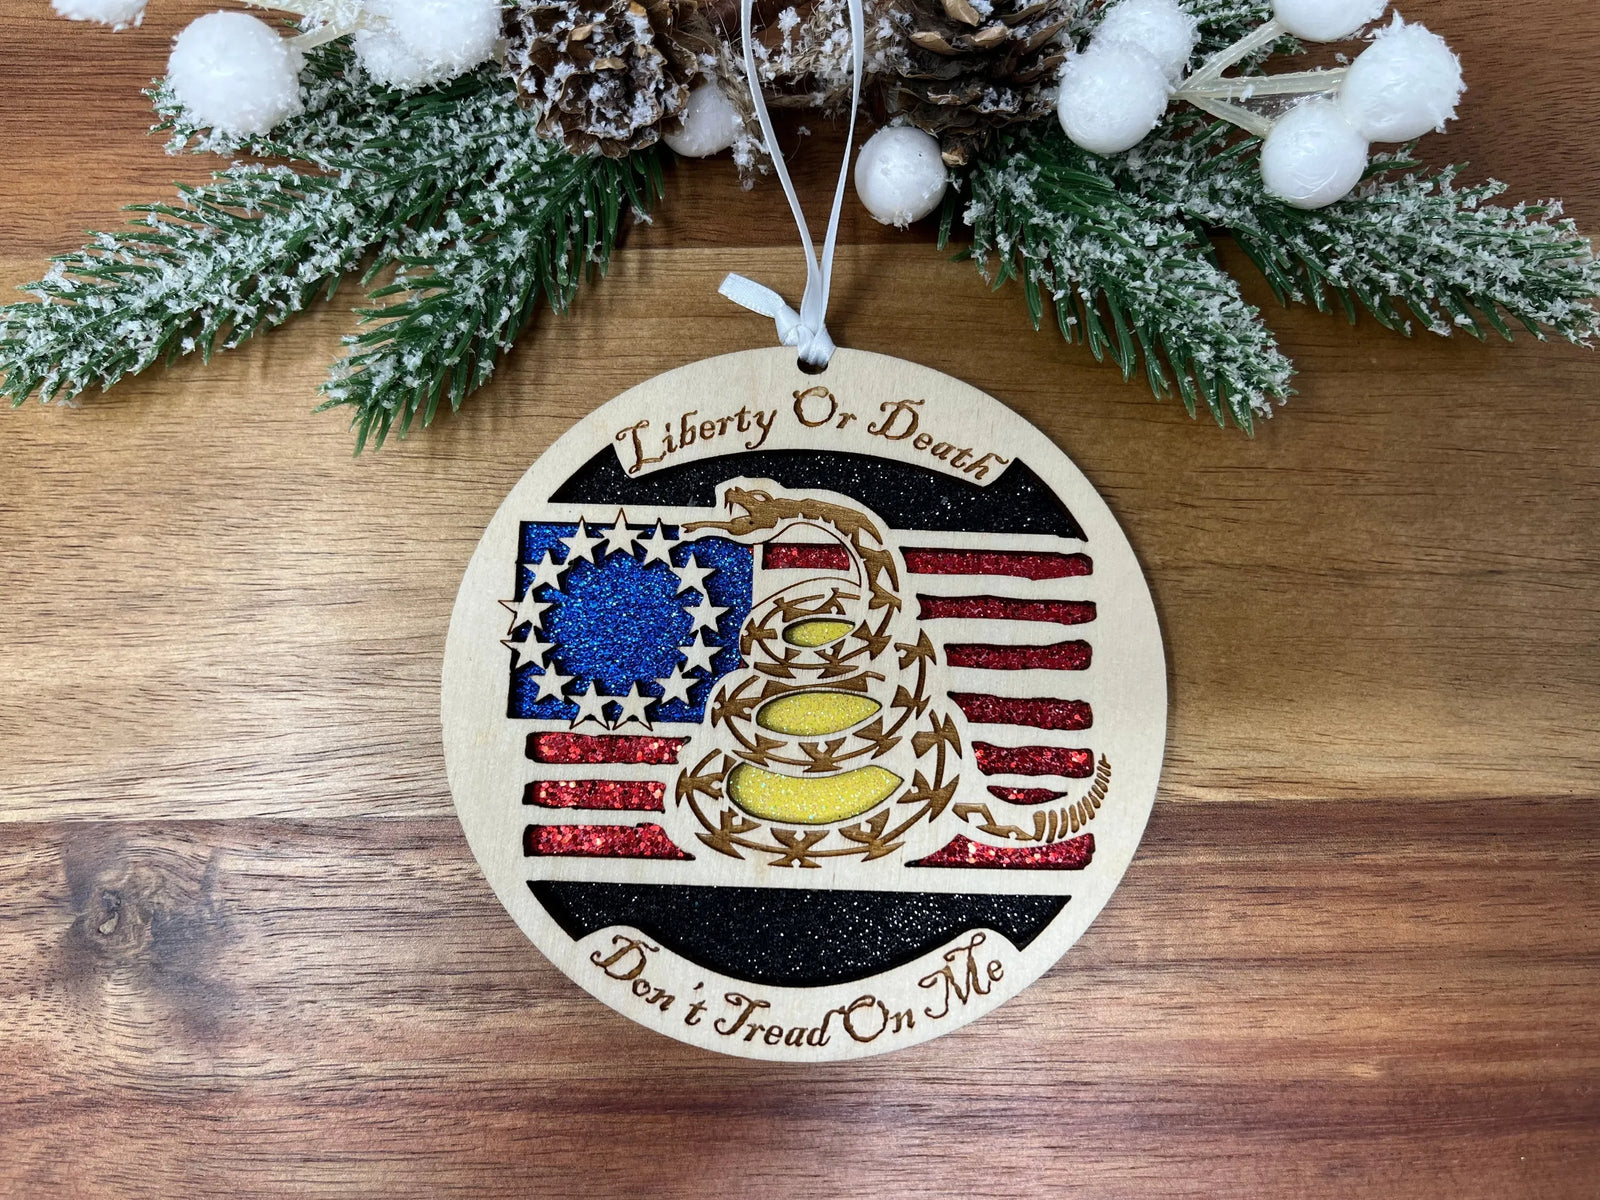 Don't Tread On Me Liberty or Death Ornament